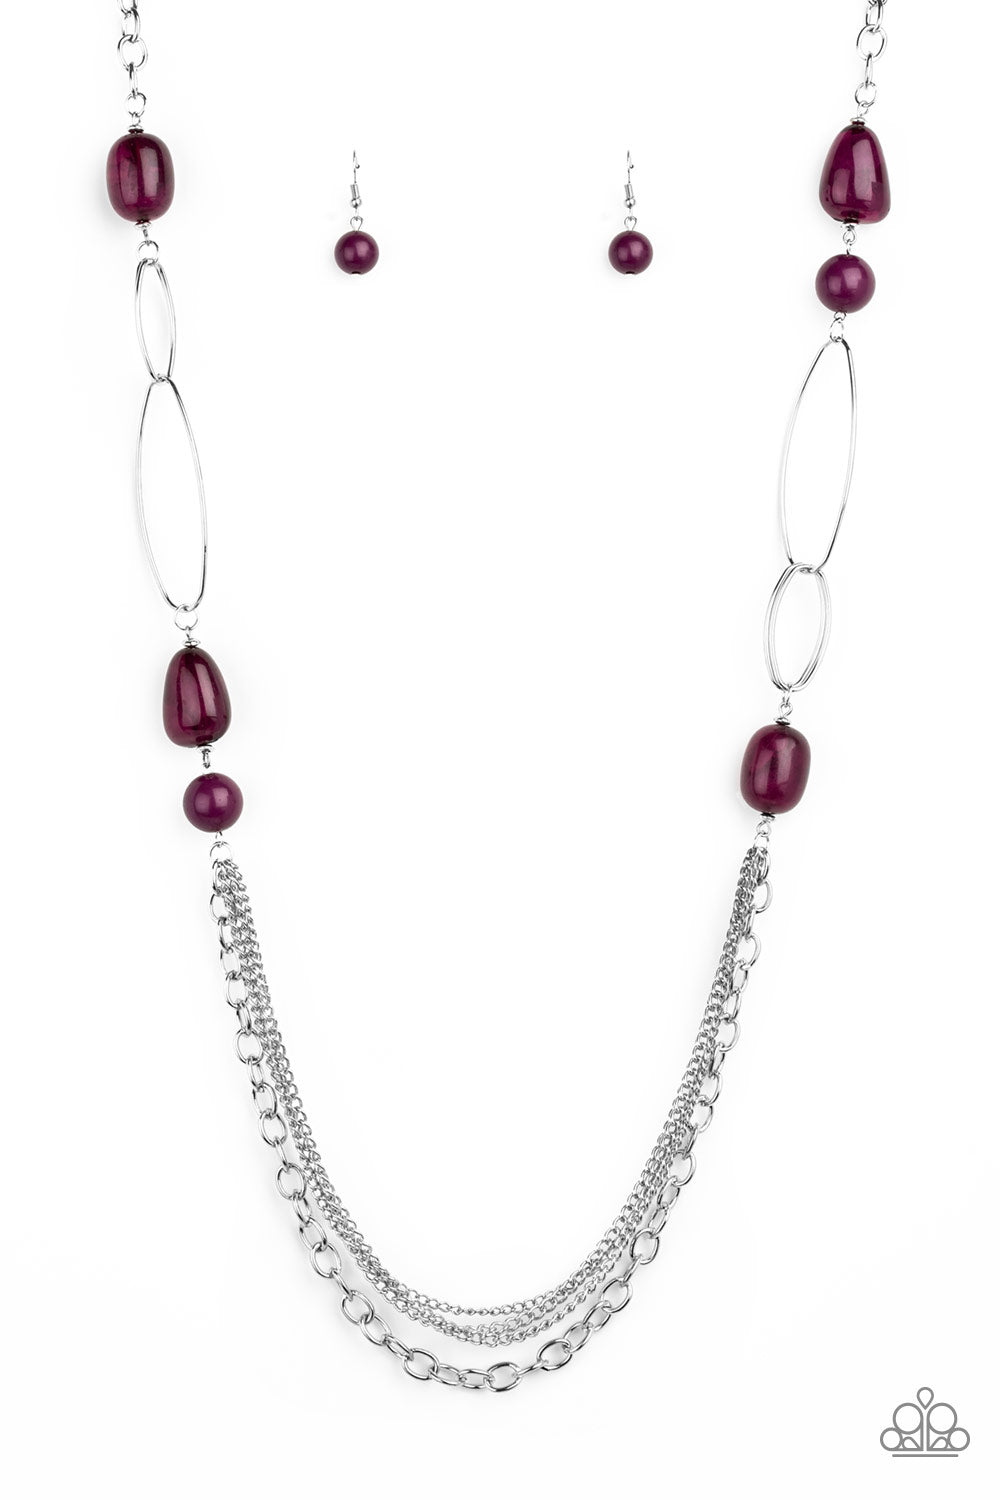 Pleasant Promenade - Purple and Silver Fashion Necklace - Paparazzi Accessories - Polished and cloudy faux rock finishes, Magenta Purple beads link with bold silver hoops. The whimsical compilation gives way to layers of mismatched silver chains for a seasonal finish. Features an adjustable clasp closure. Sold as one individual necklace.